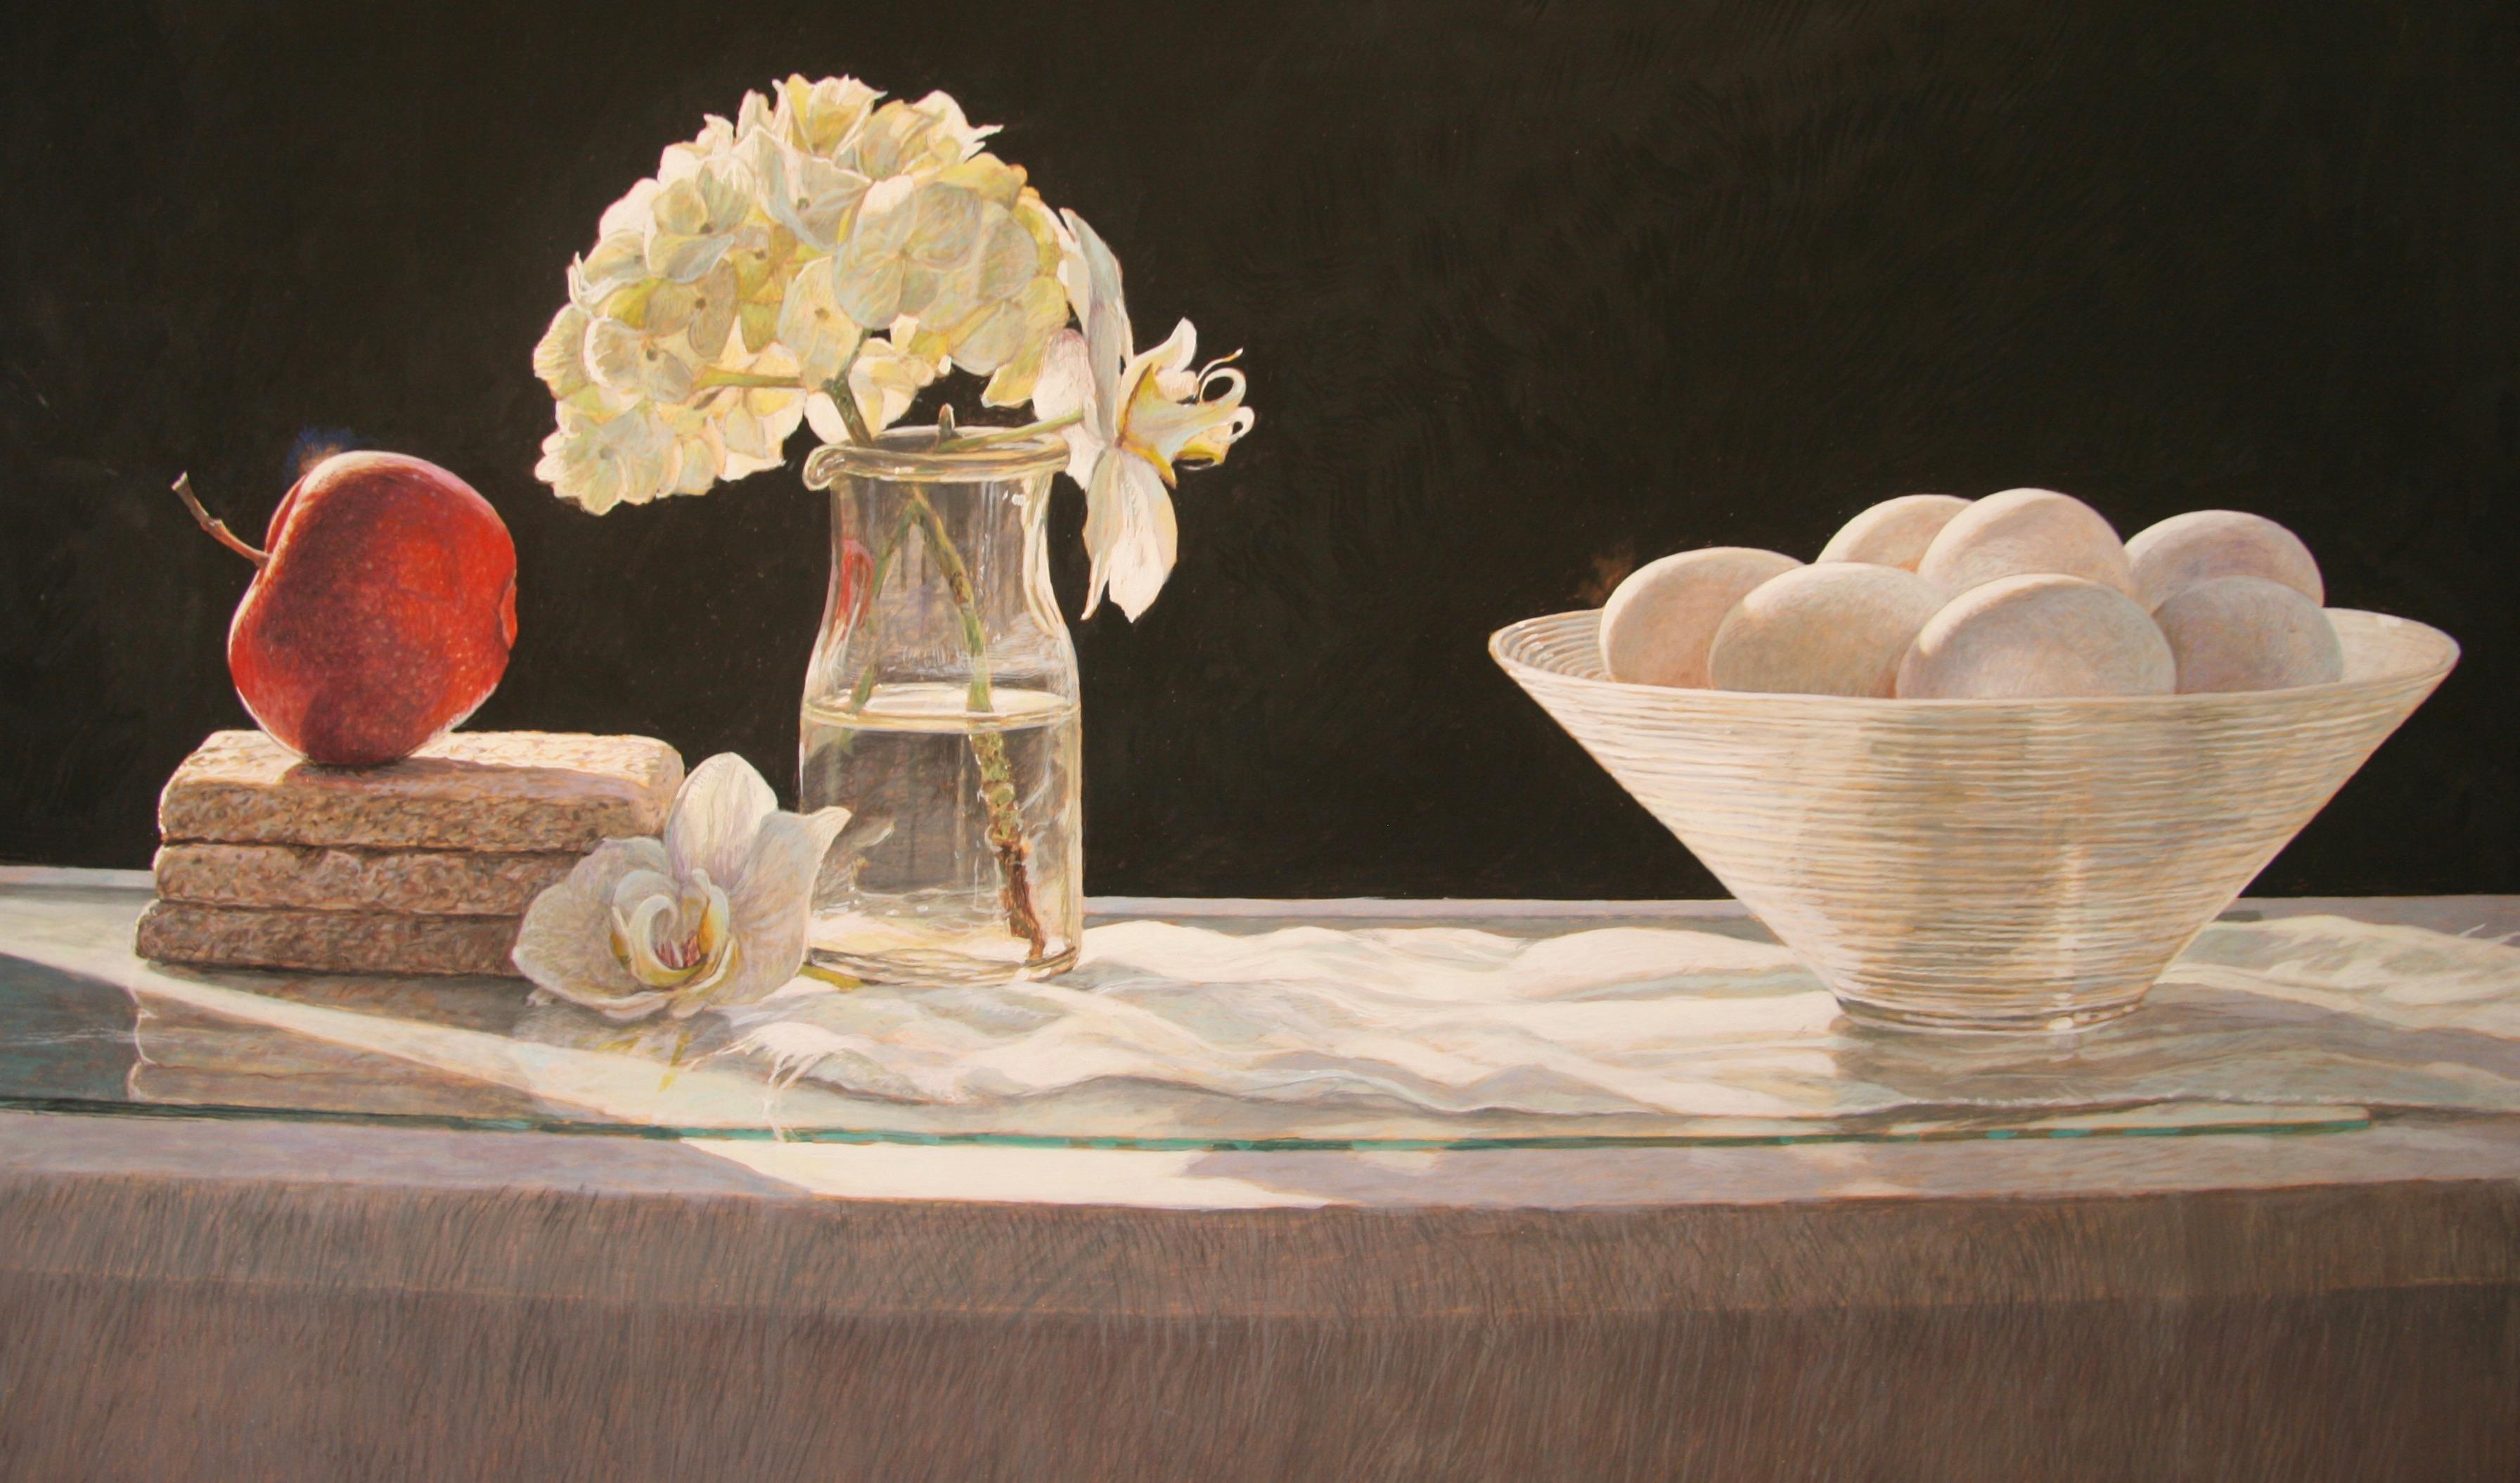 WHITE SHELLS COLIN FRASER CONTEMPORARY SCOTTISH ARTIST - Realist Painting by Colin Fraser